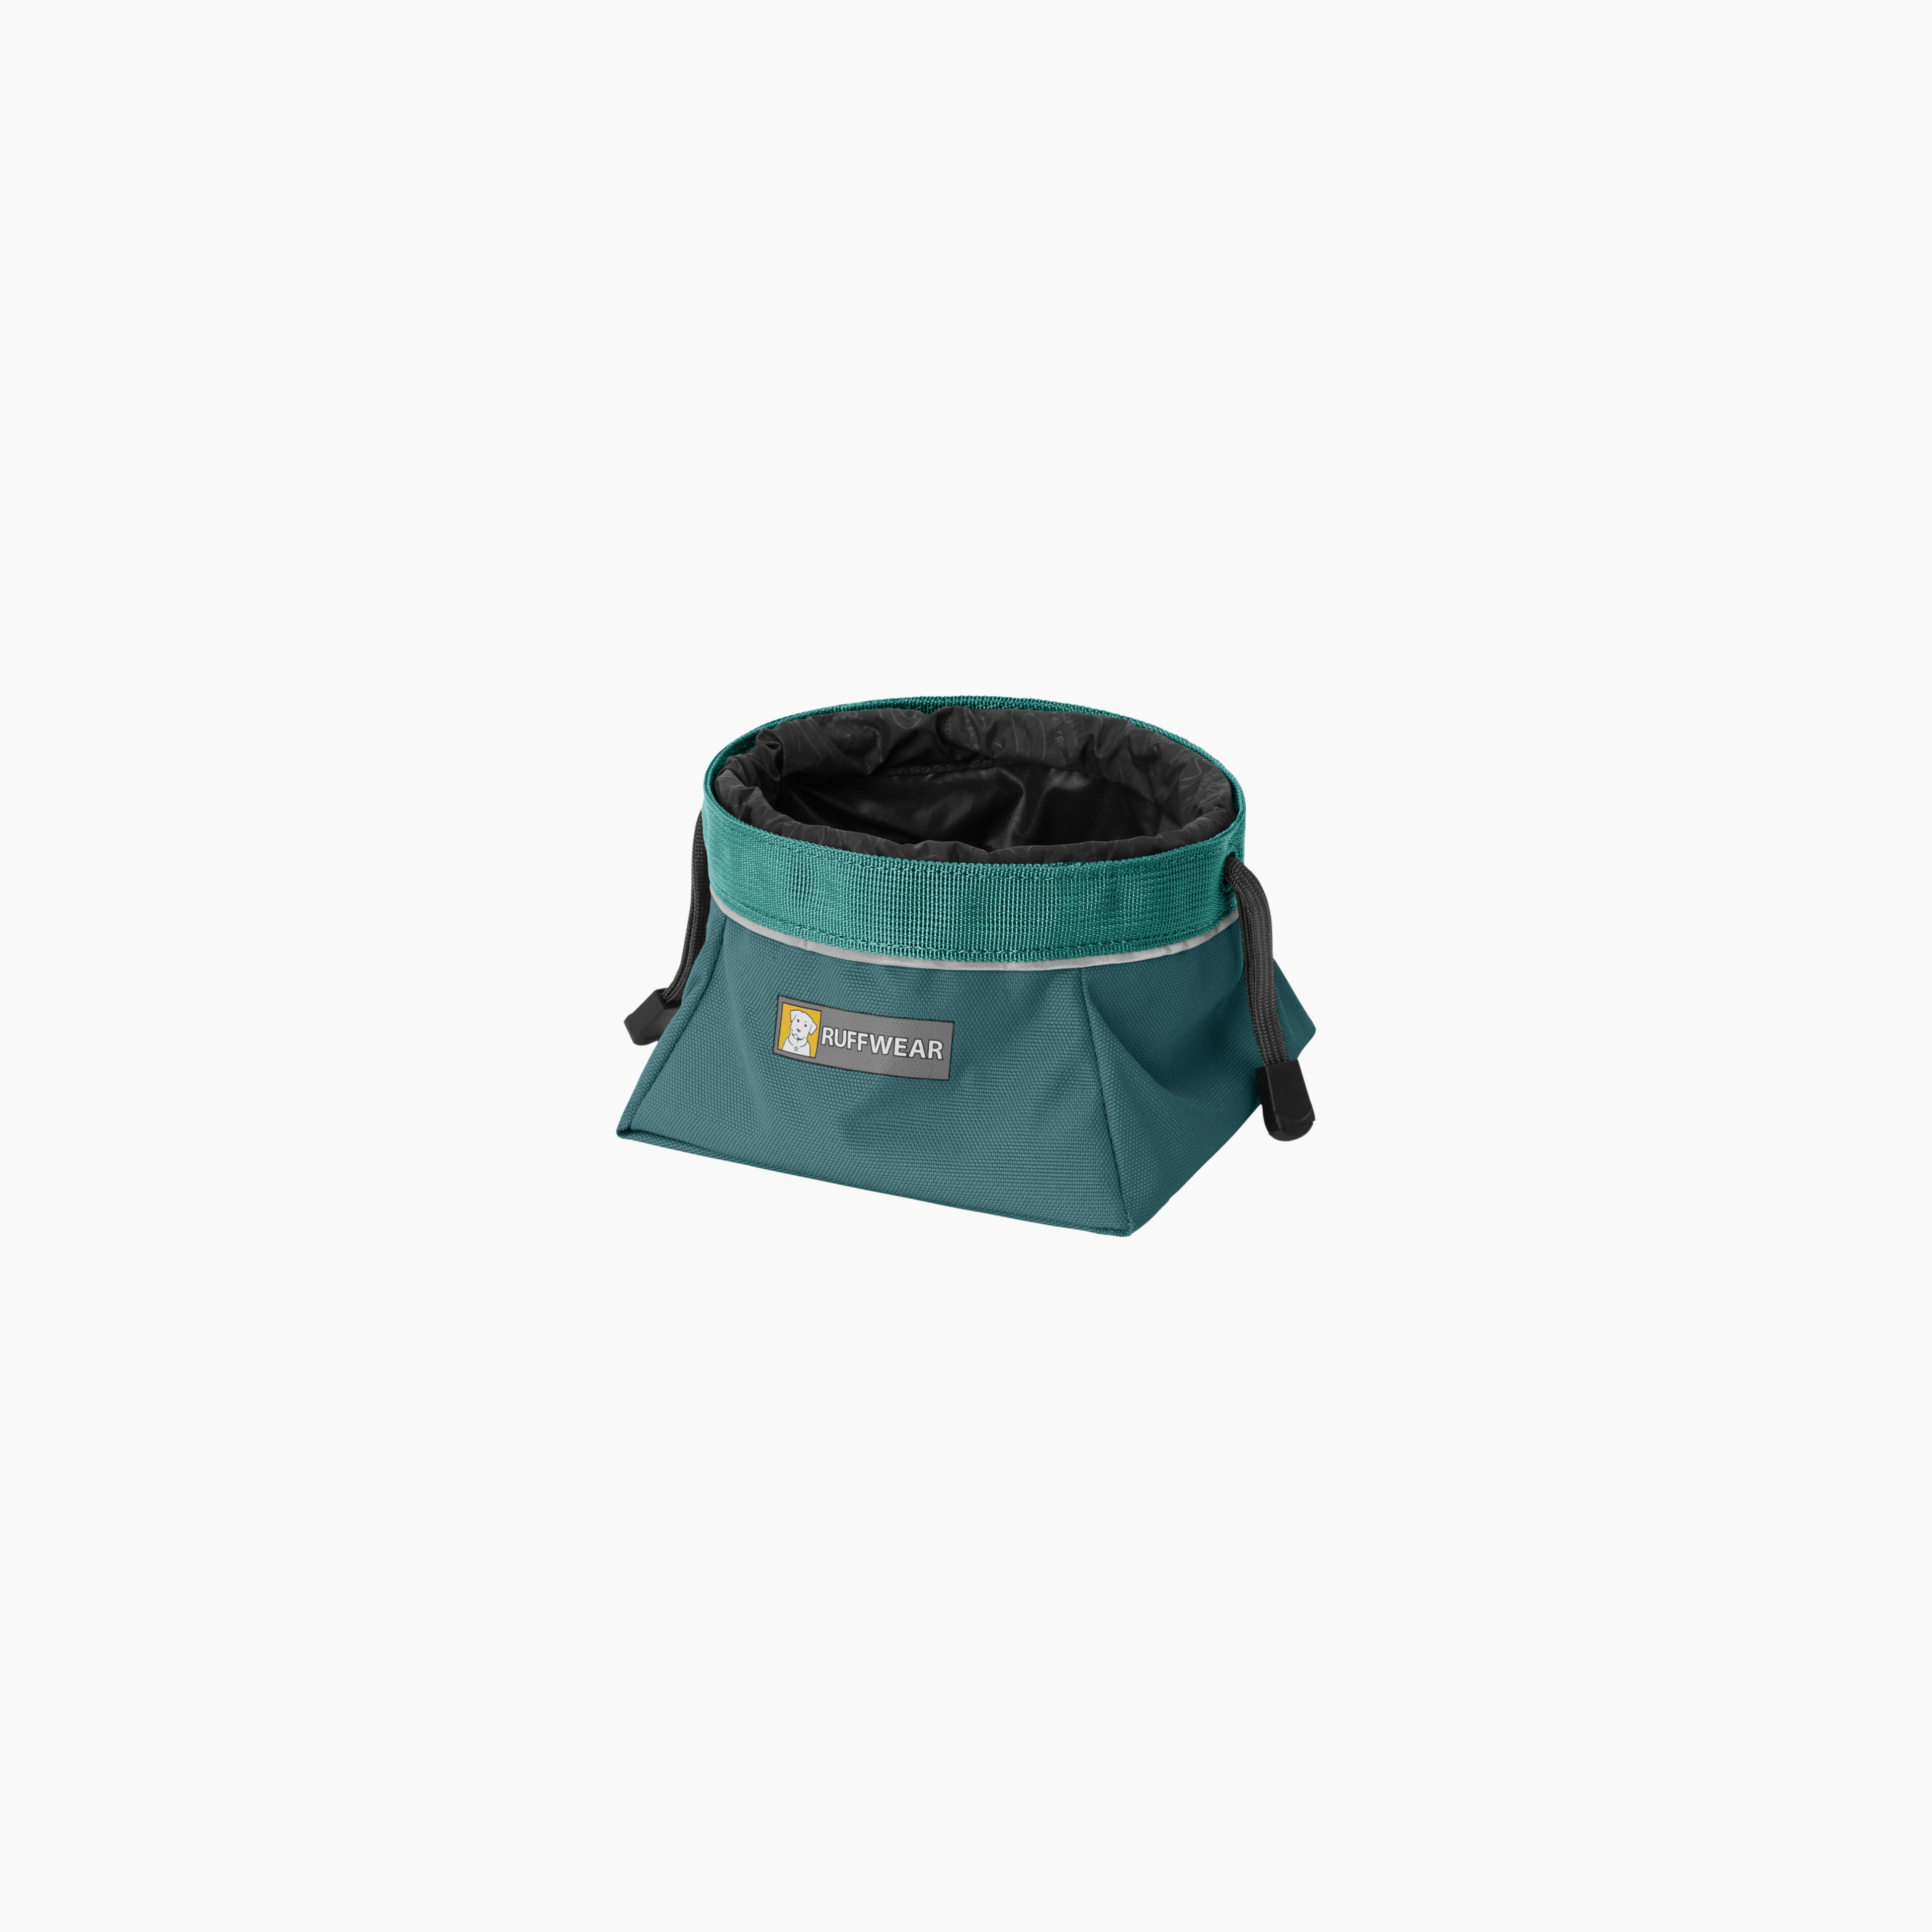 Quencher Cinch Top Packable Dog Bowl